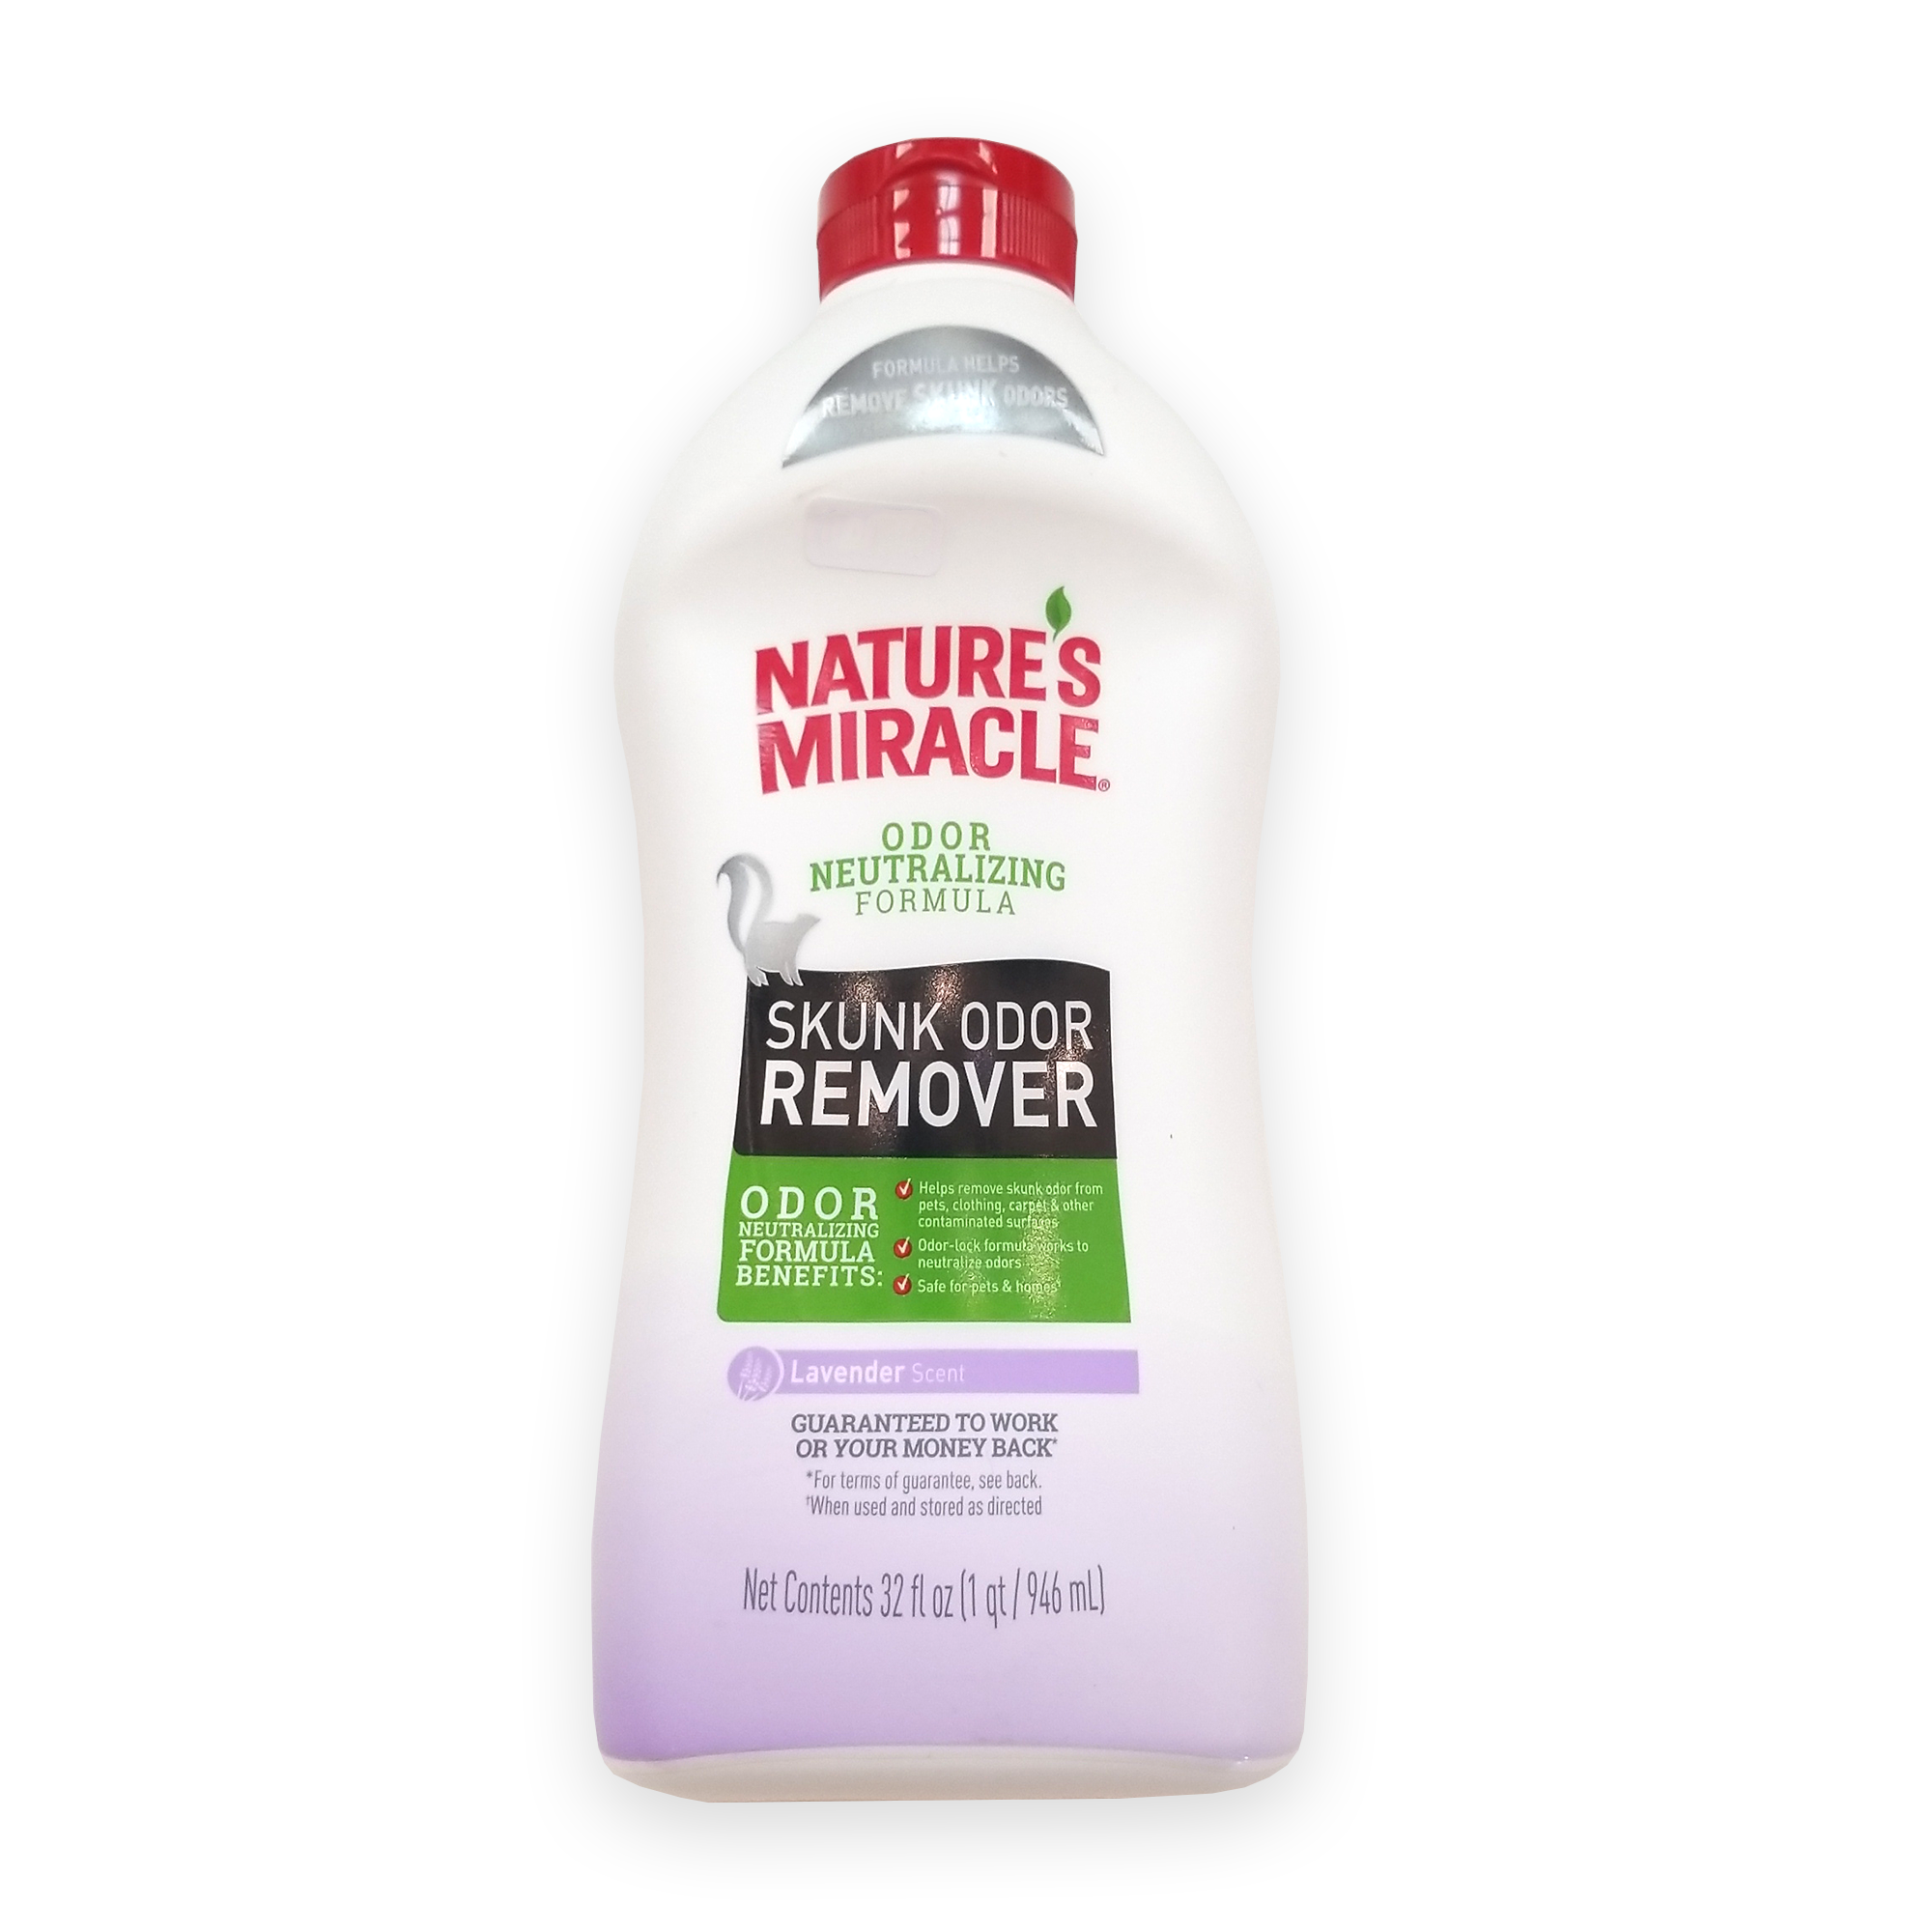 Nature's Miracle Skunk Odor Remover Lavender Scent For Pets Clothing Carpet & Other Surfaces (946ml)